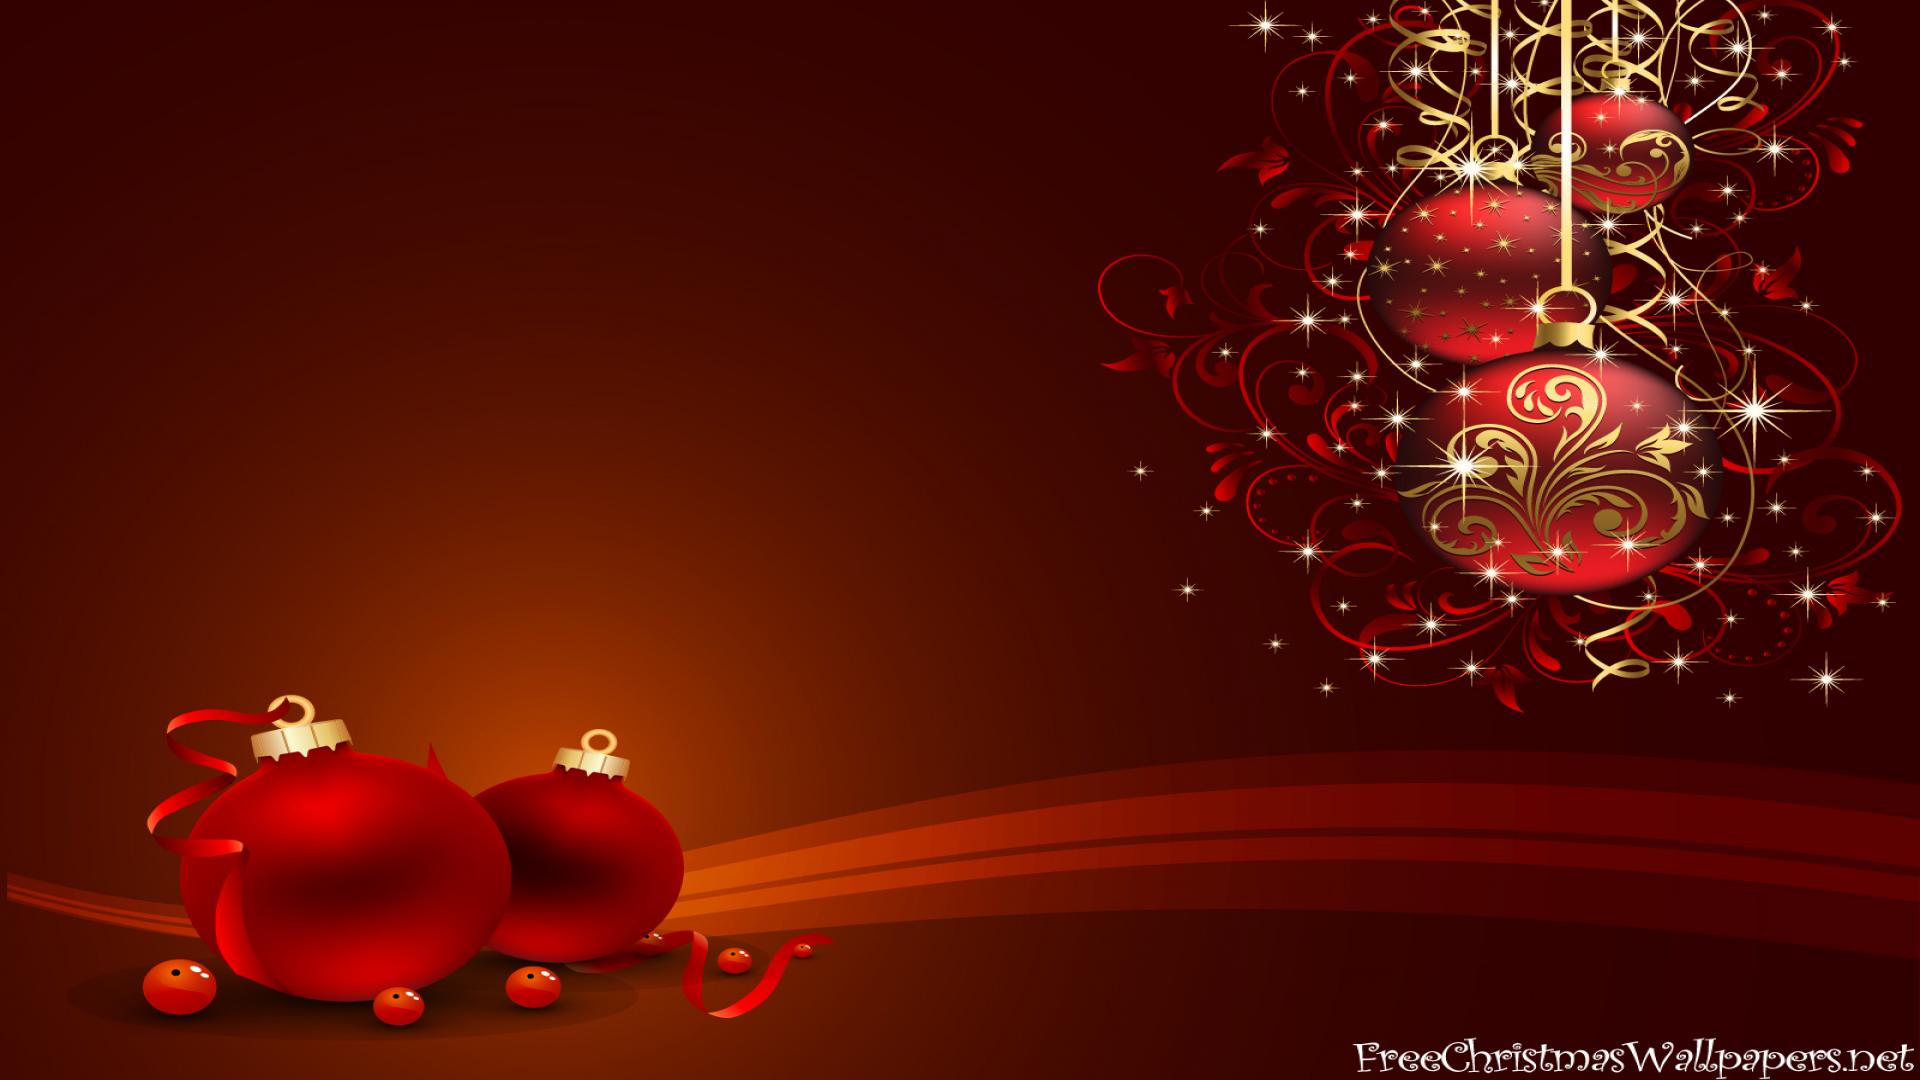 After Christmas HD Wallpapers 1920x1080 Christmas Wallpapers 1920x1080